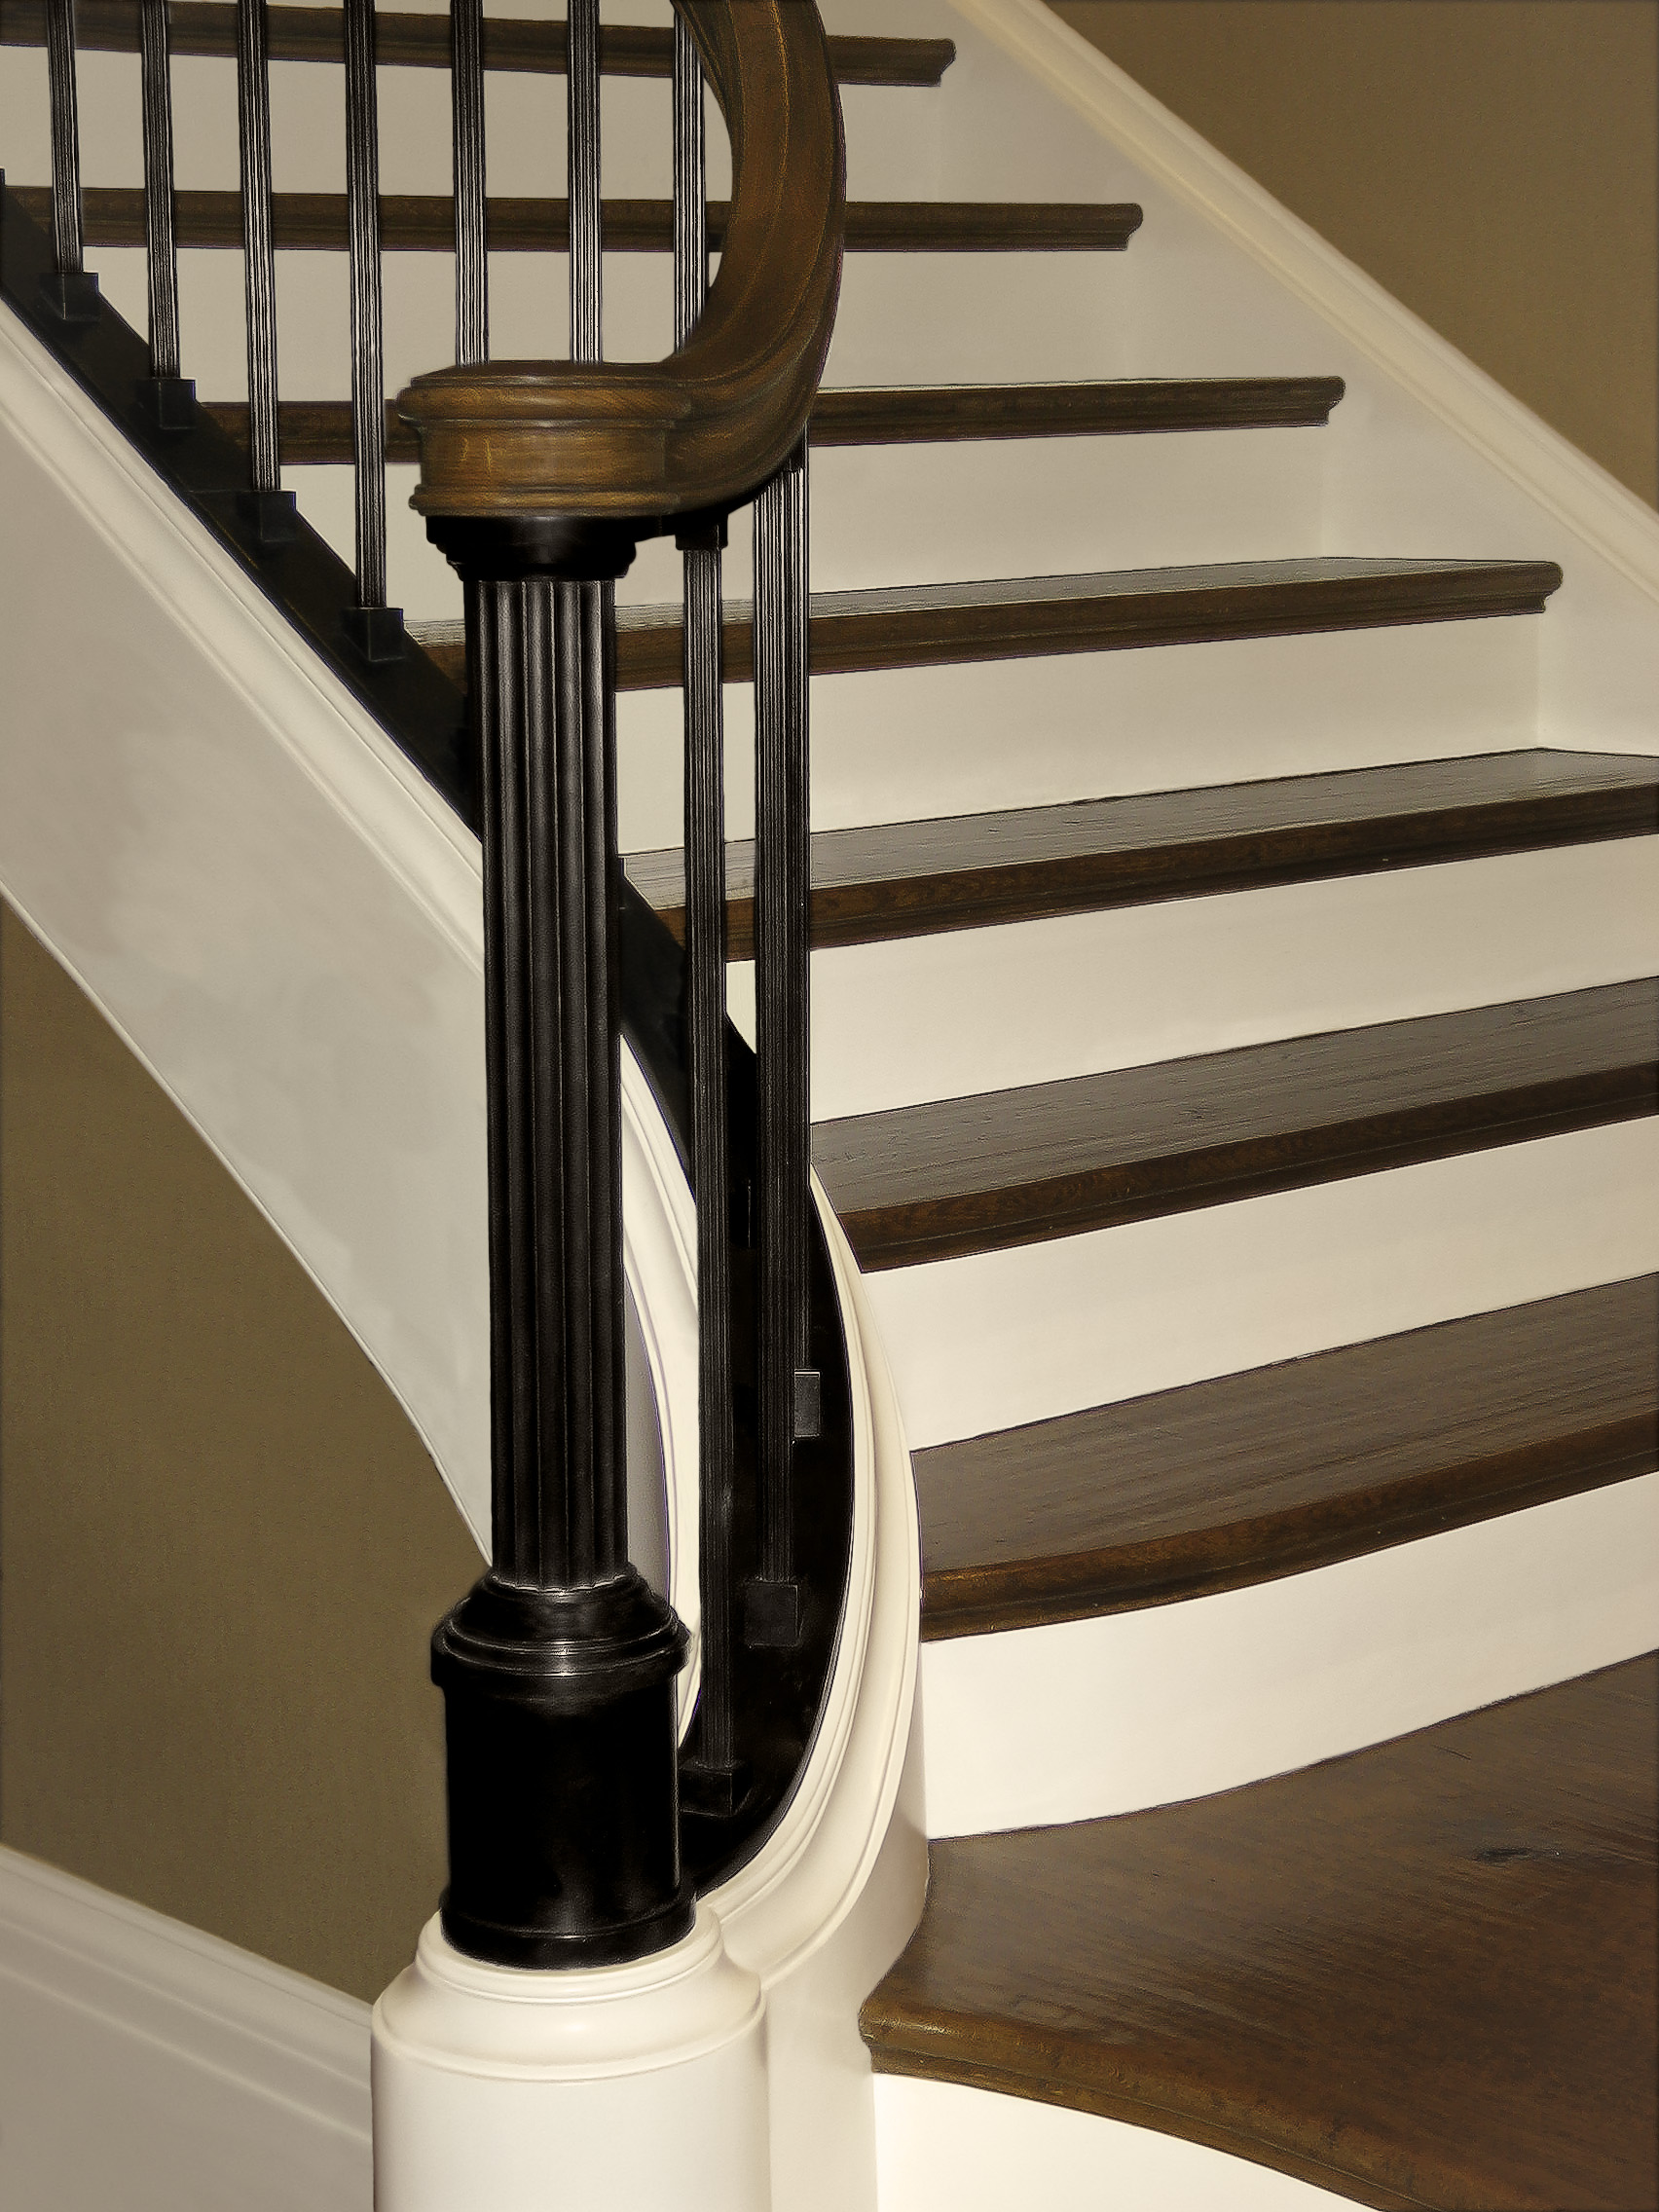 Architectural wood and metal stairs